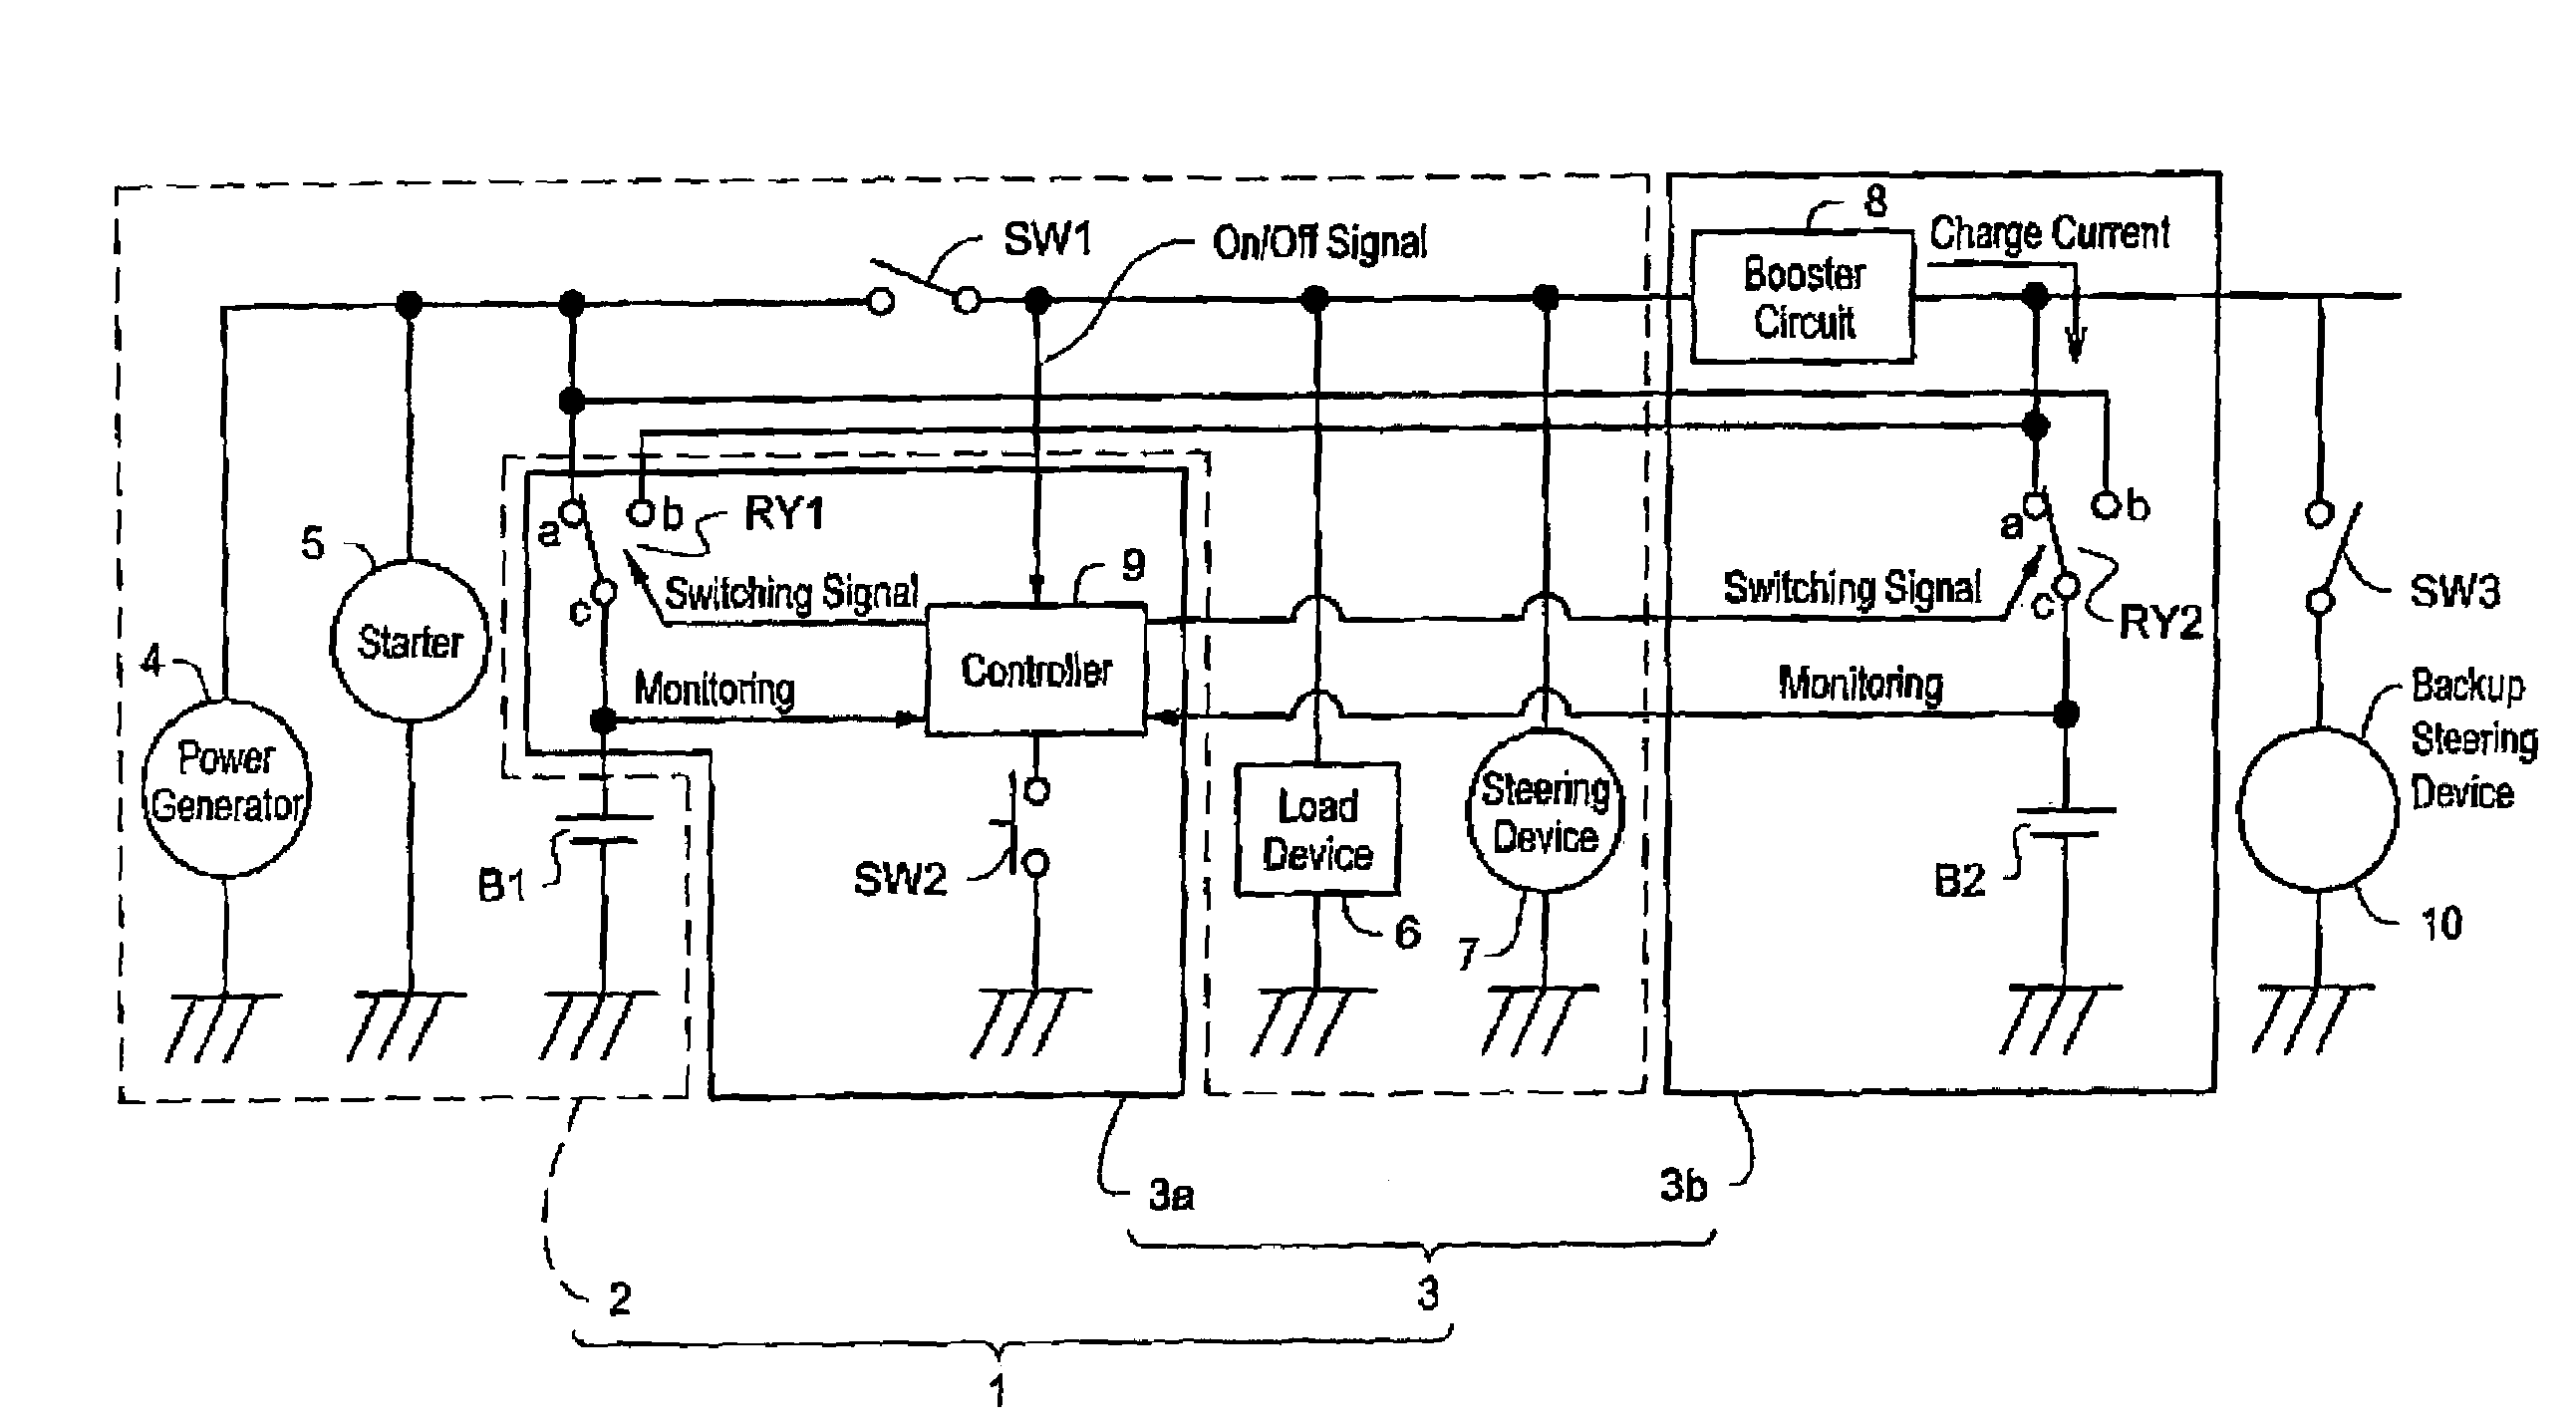 Apparatus for supplying power for a vehicle